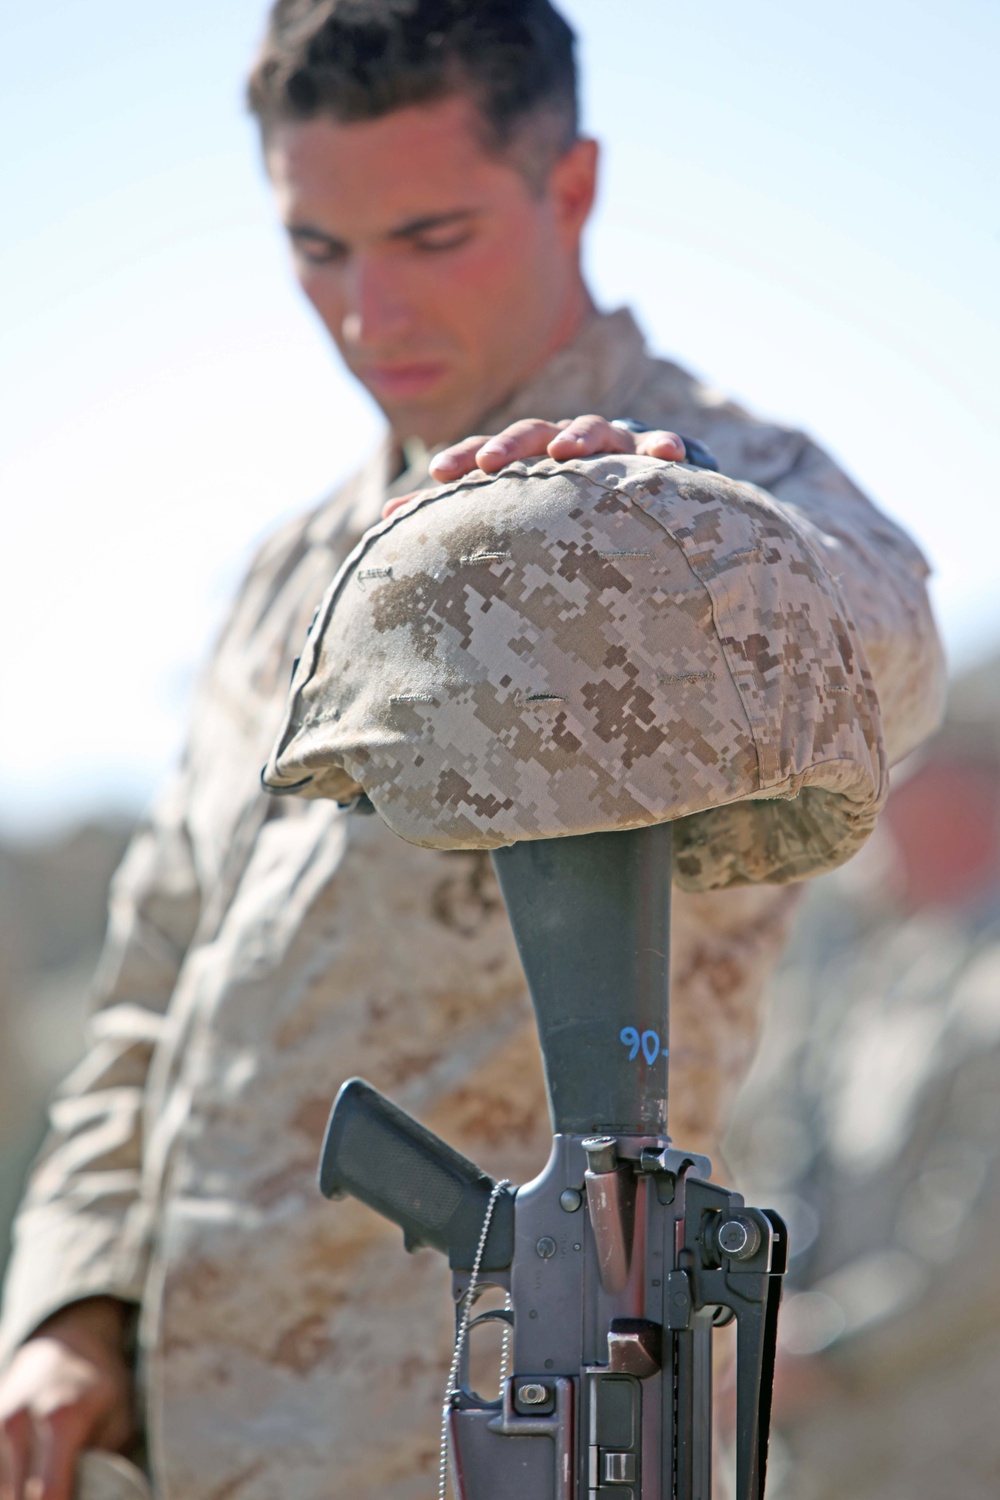 2nd Battalion, 9th Marines honor highly decorated squad leader